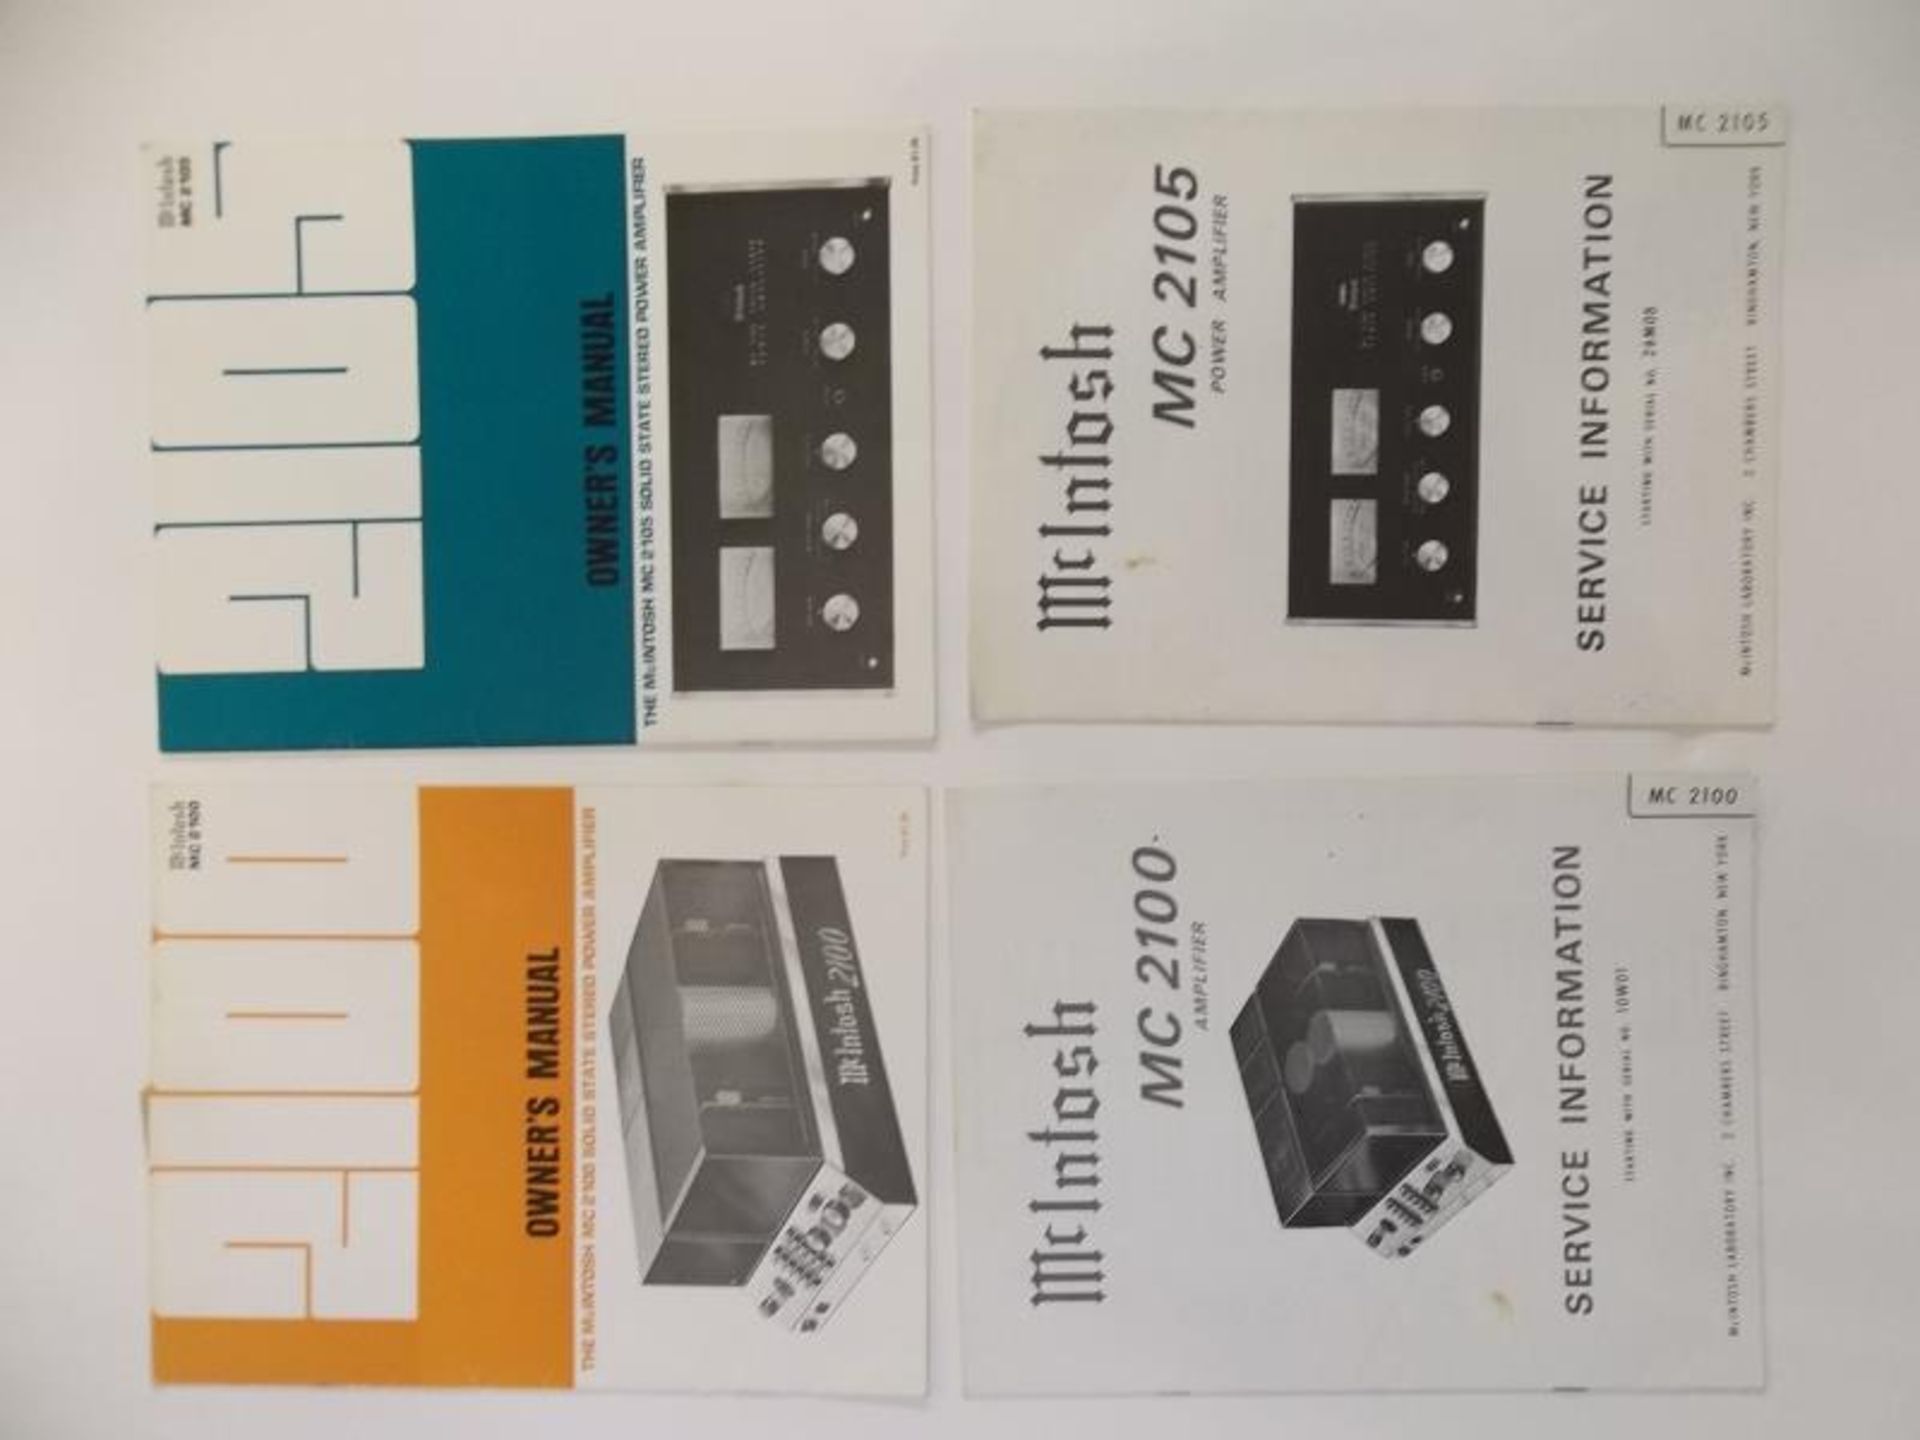 Lot of 8 - McIntosh (2) owner's manual and service info for environmental equalizers for MQ101 and - Image 3 of 5